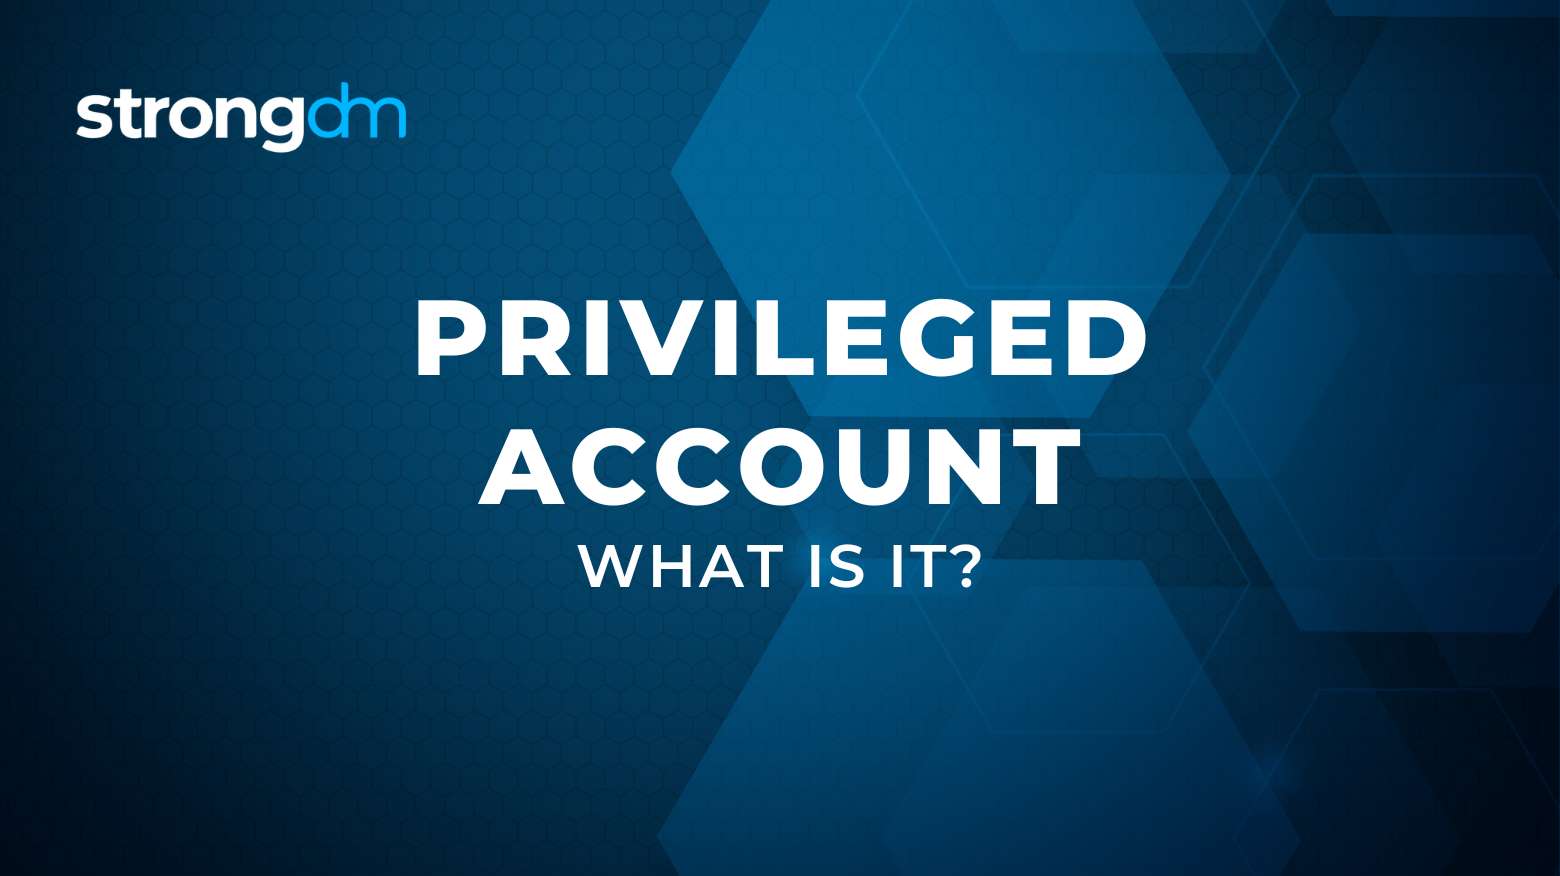 What is a Privileged Account?